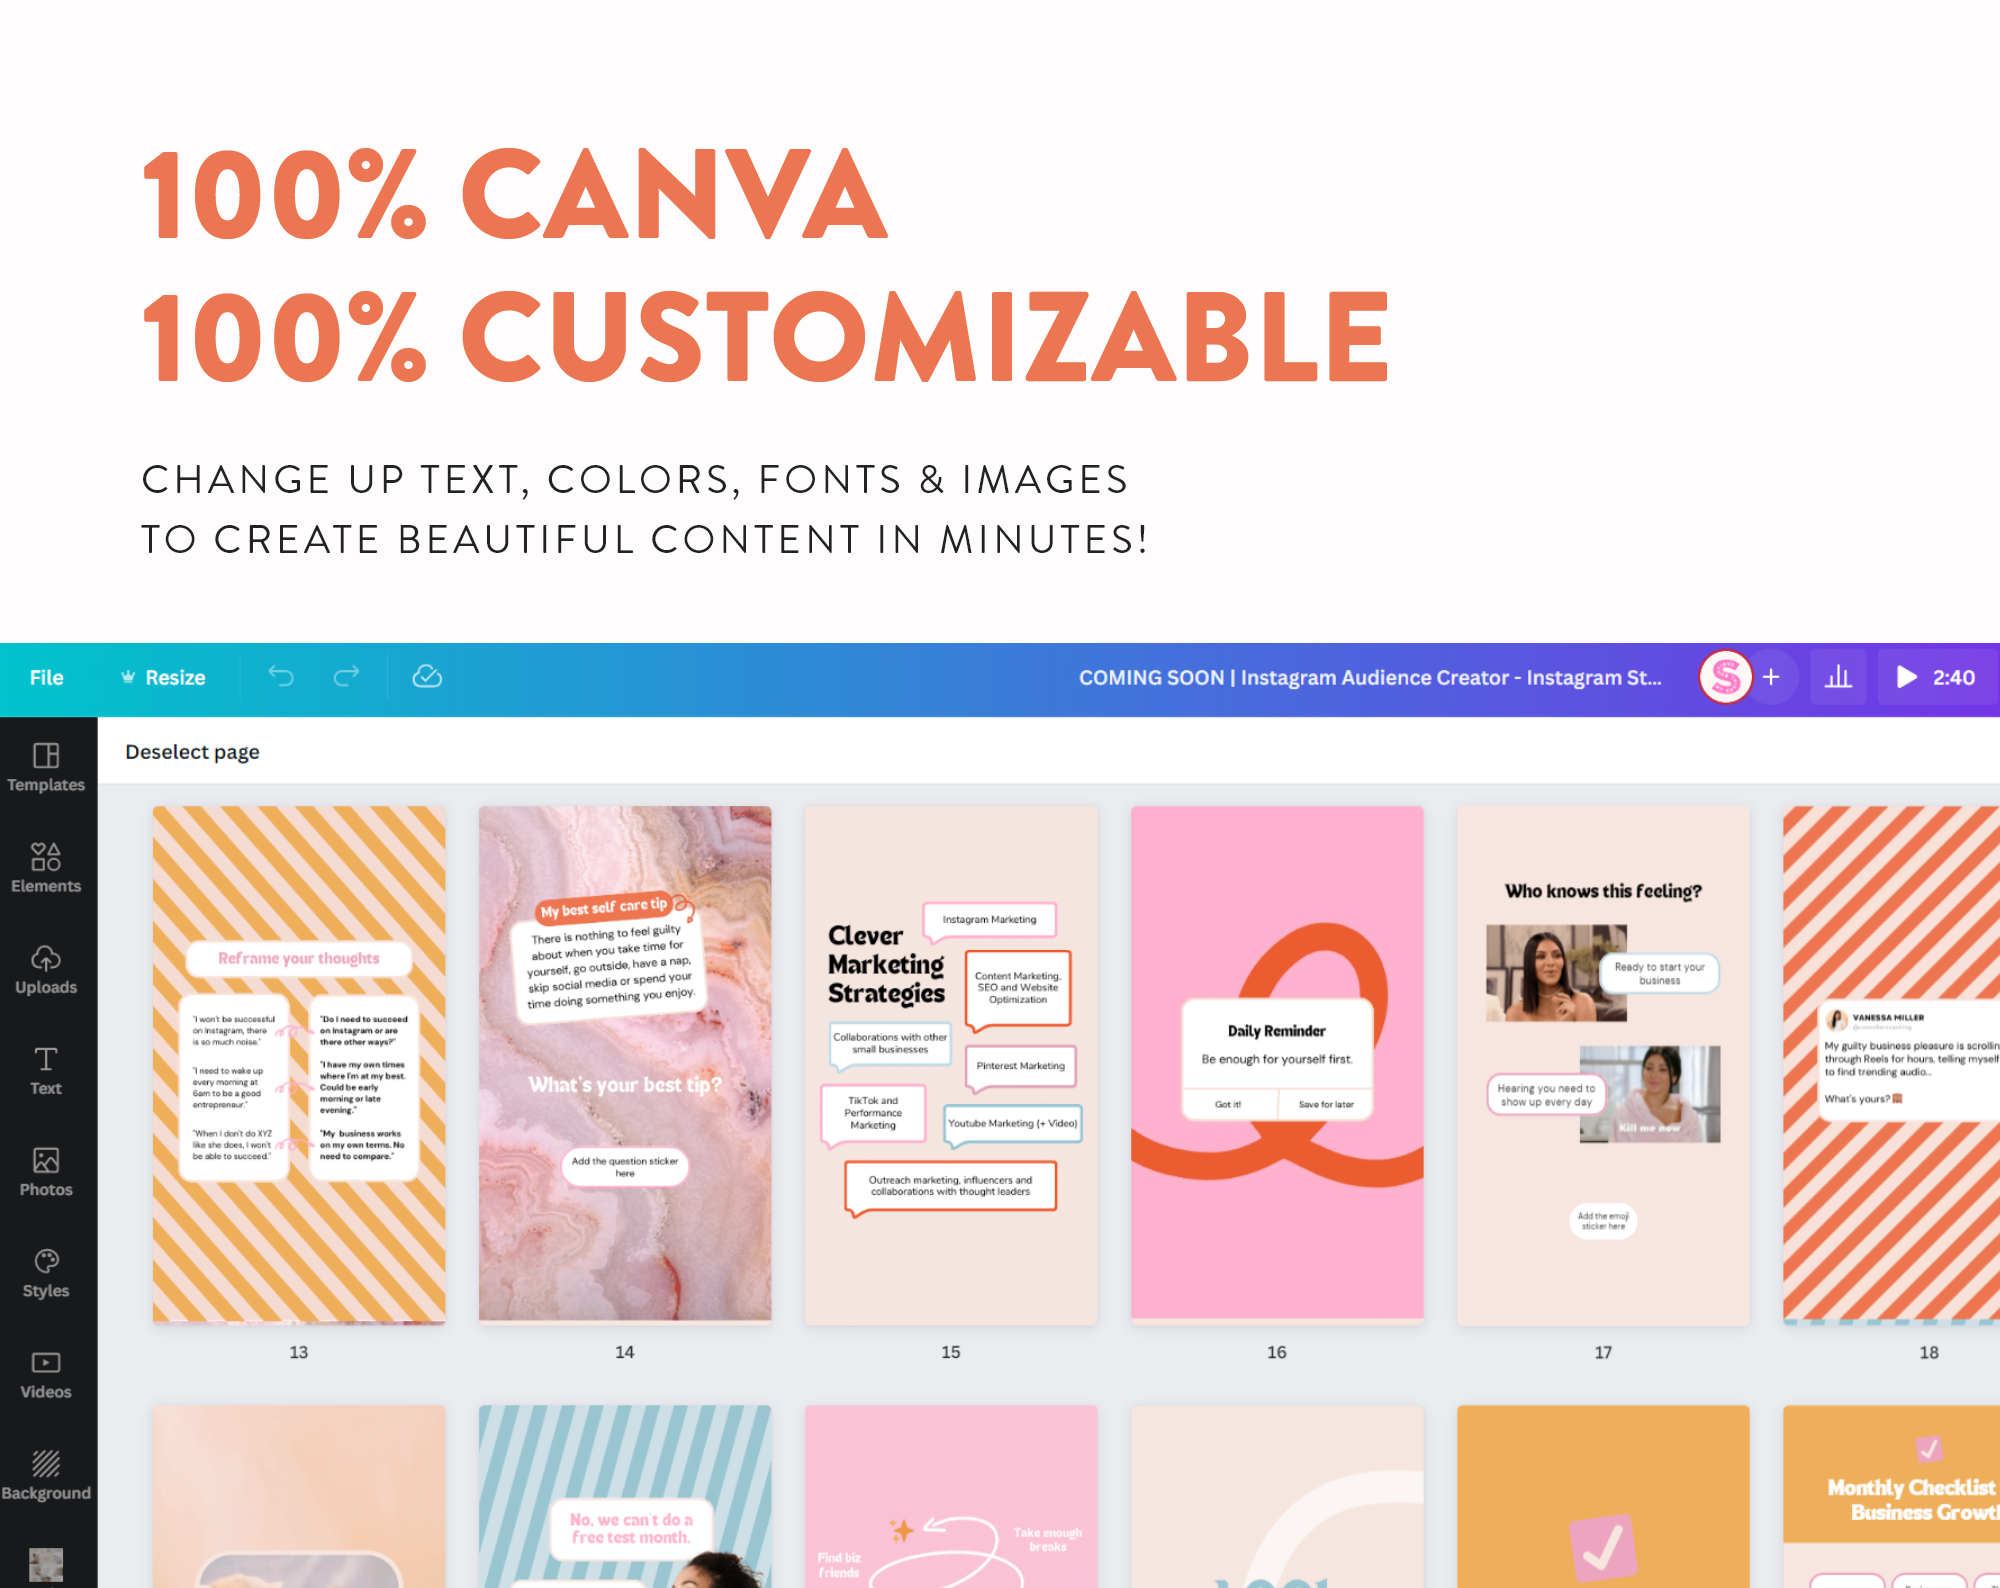 Instagram-audience-creator-post-story-templates-for-canva-customizable-6